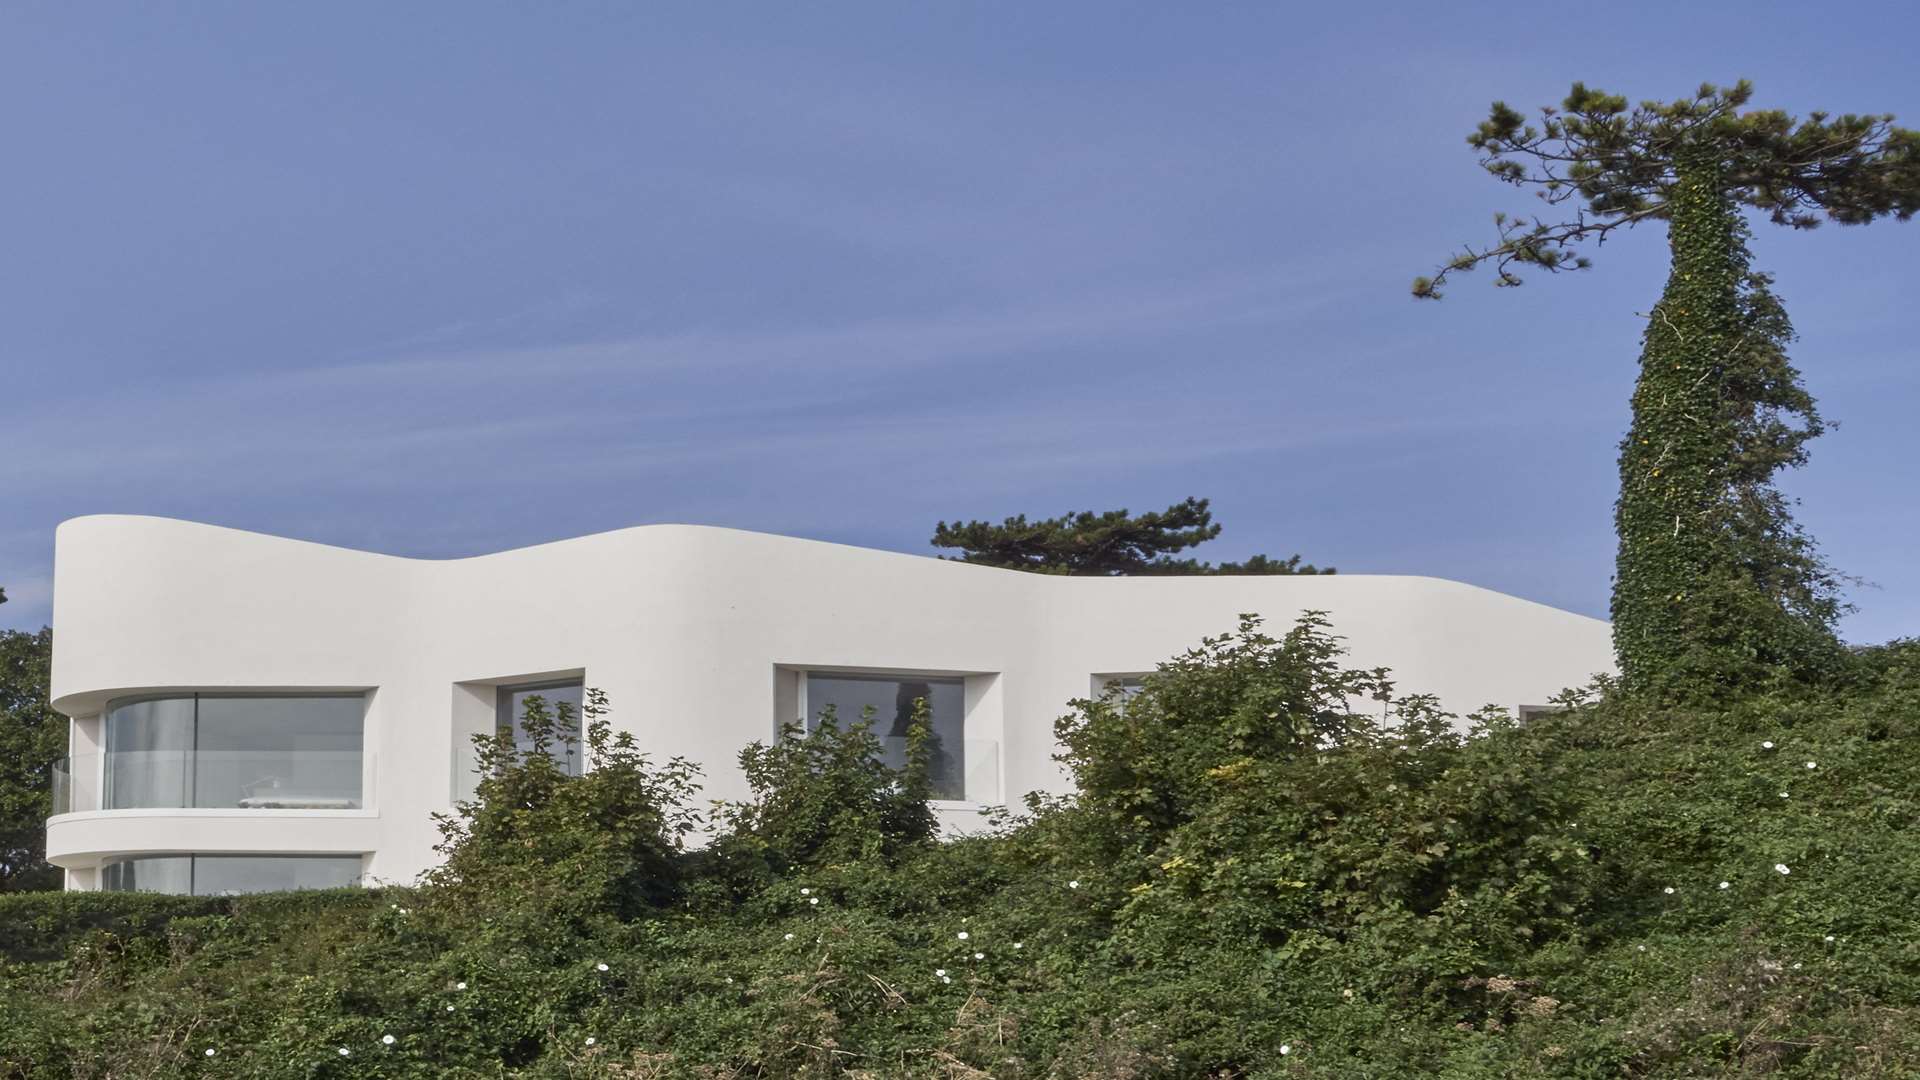 The award-winning Ness Point house. Picture courtesy of Nick Guttridge.